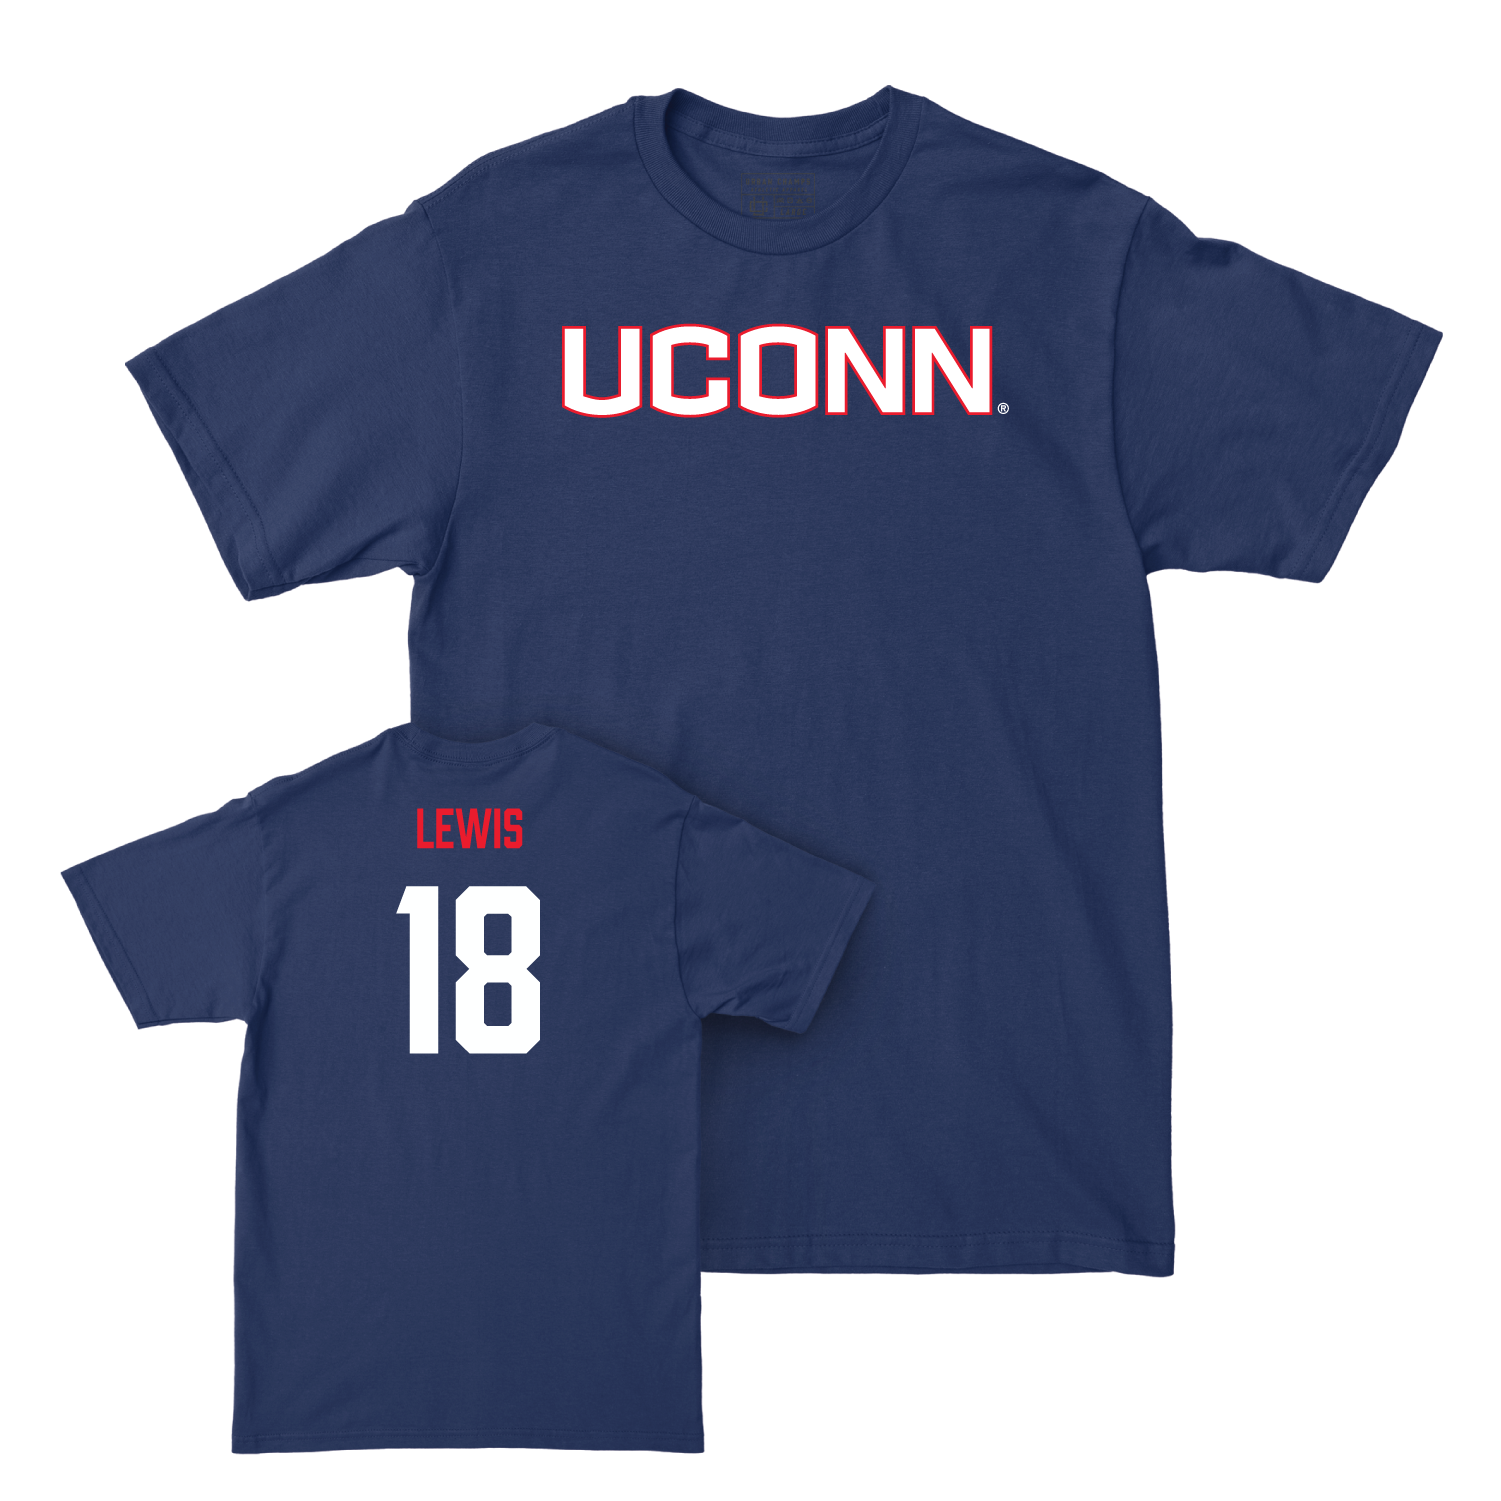 Navy Women's Soccer UConn Tee Small / Laci Lewis | #18